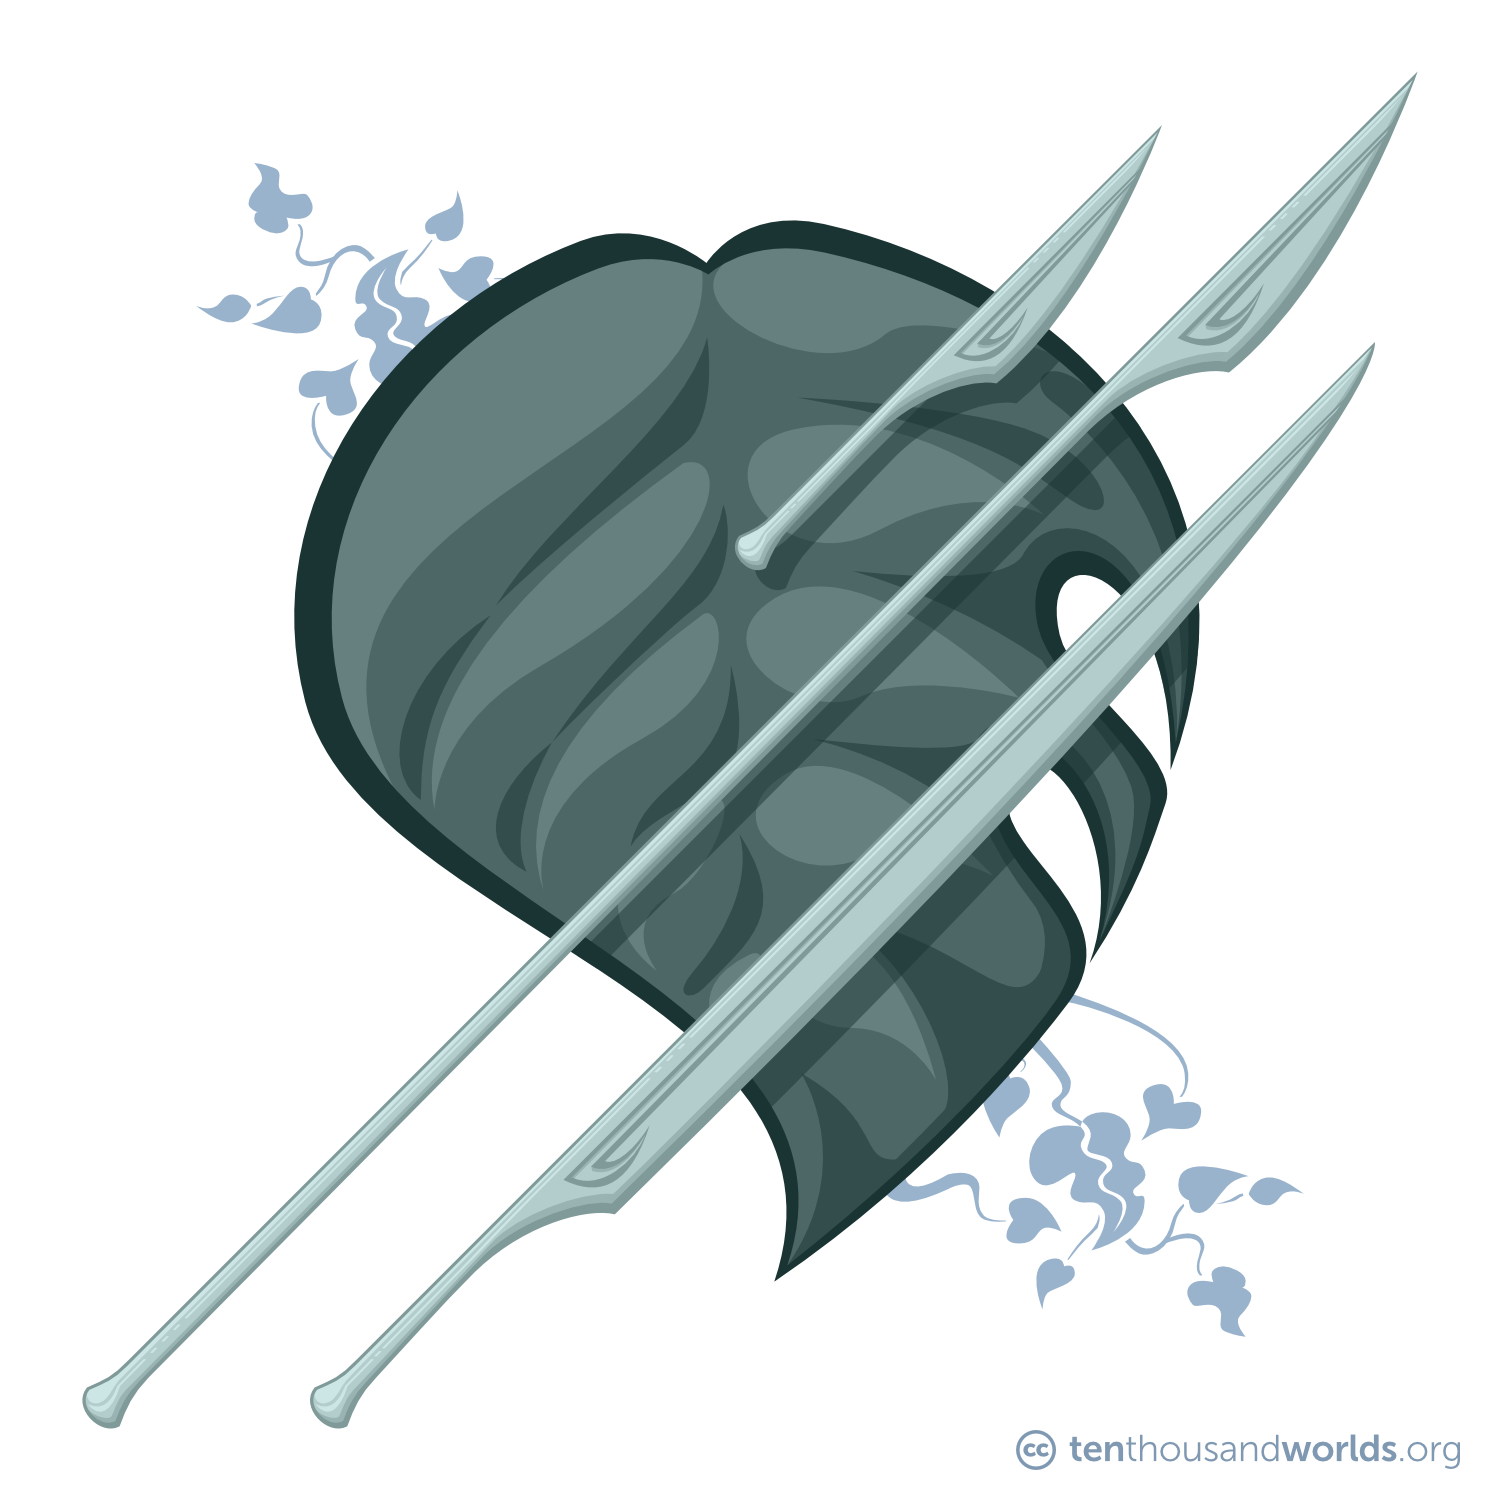 Three weapons, a long knife, a spear, and a sword, with similar-shaped silver-green blades and handles/shafts/hilts, all in different proportions, all calling to mind parts of plants. They all float above a leaf-shaped green-grey shield.